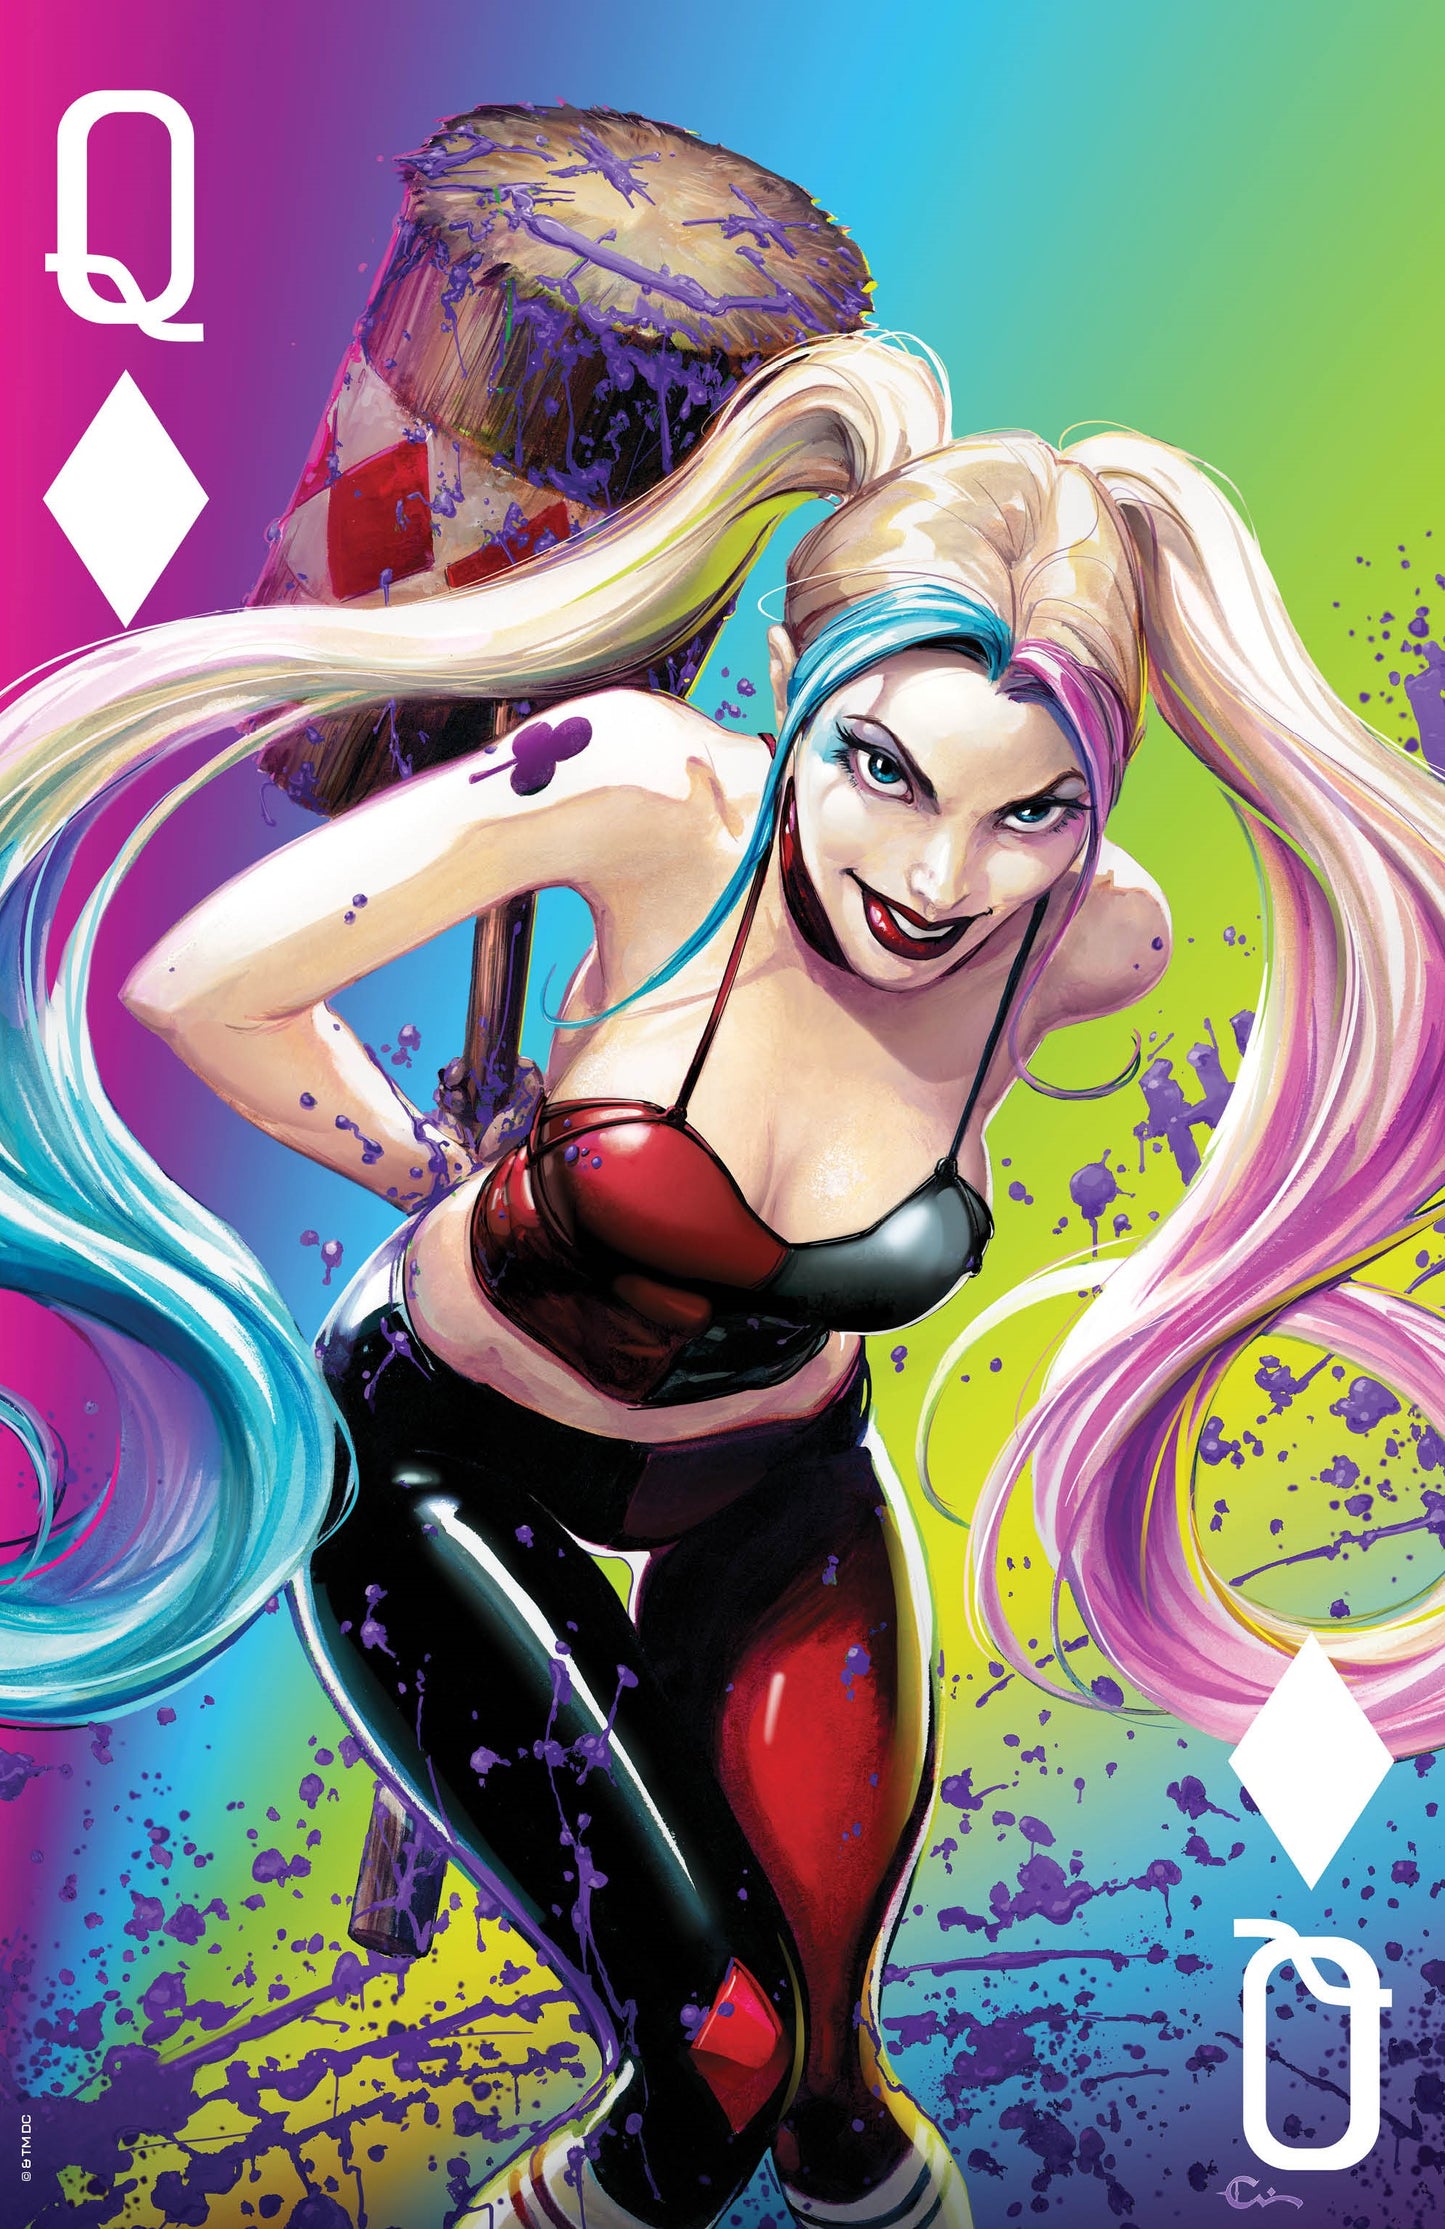 SDCC 2023 HARLEY QUINN #31 CLAYTON CRAIN FOIL VARIANT LIMITED TO 1000 COPIES - RAW & GRADED OPTIONS